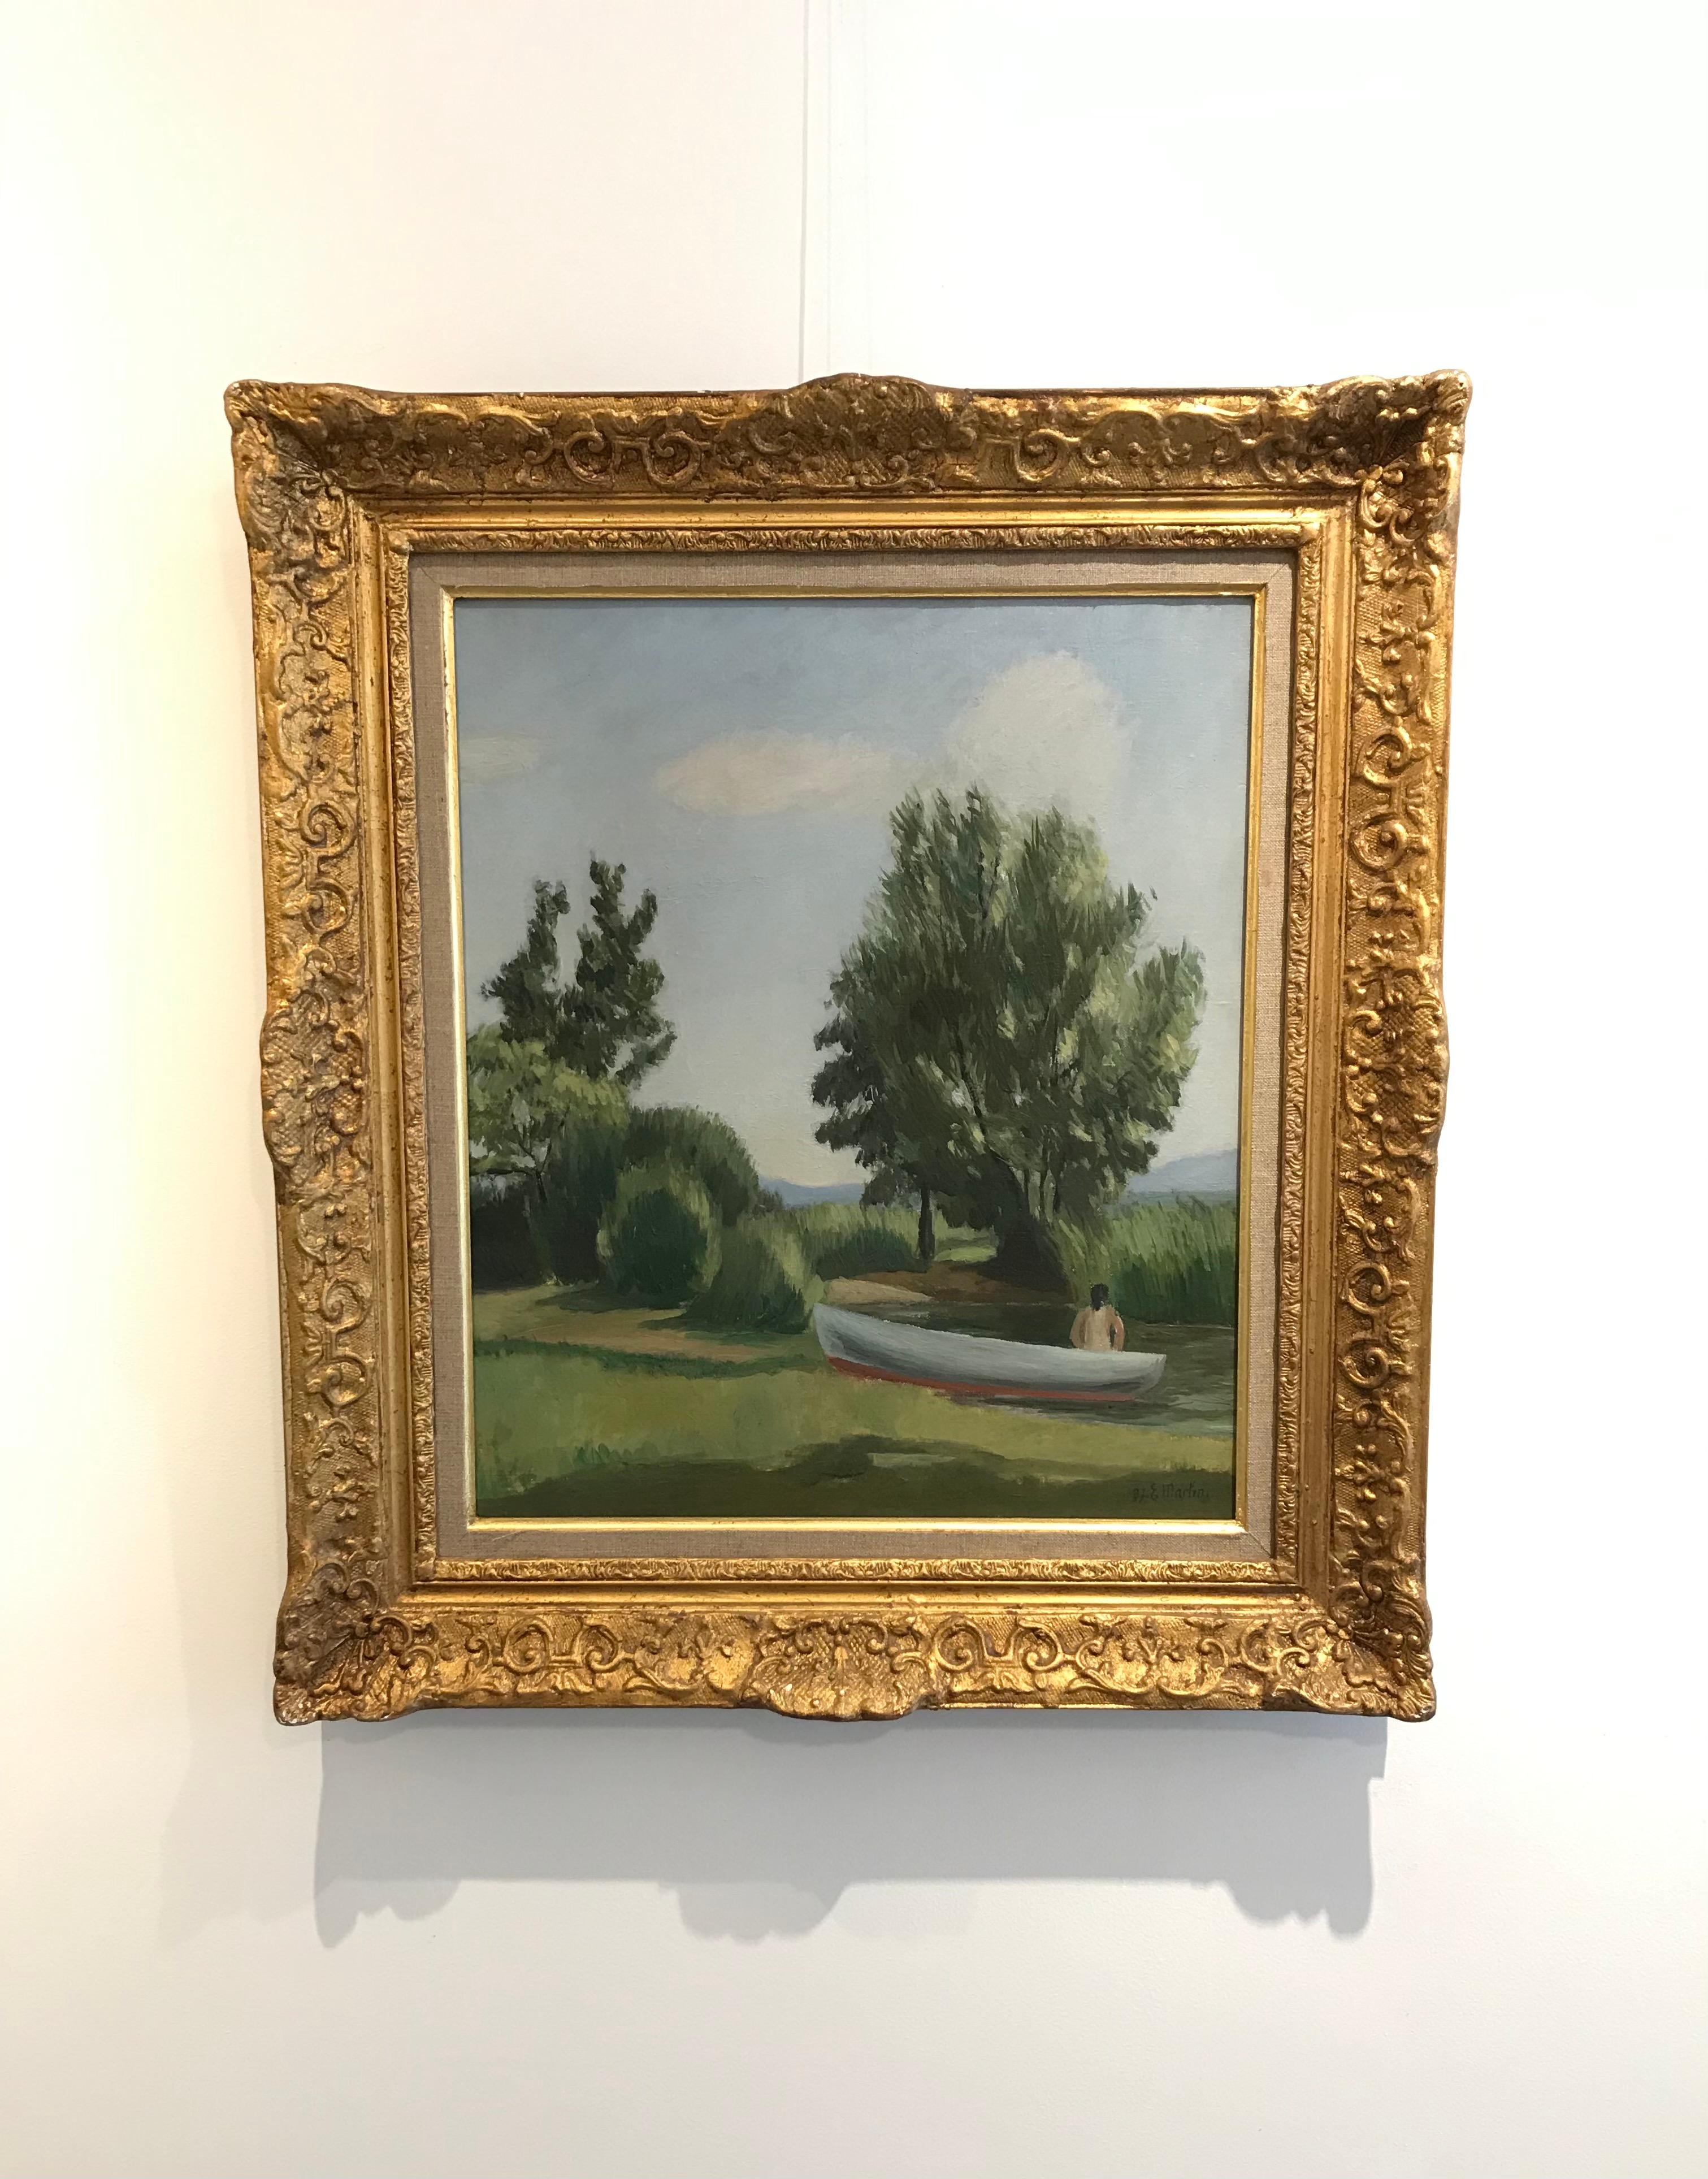 Animated landscape by Eugène Martin - Oil on canvas 44x55 cm - Painting by Eugene Martin